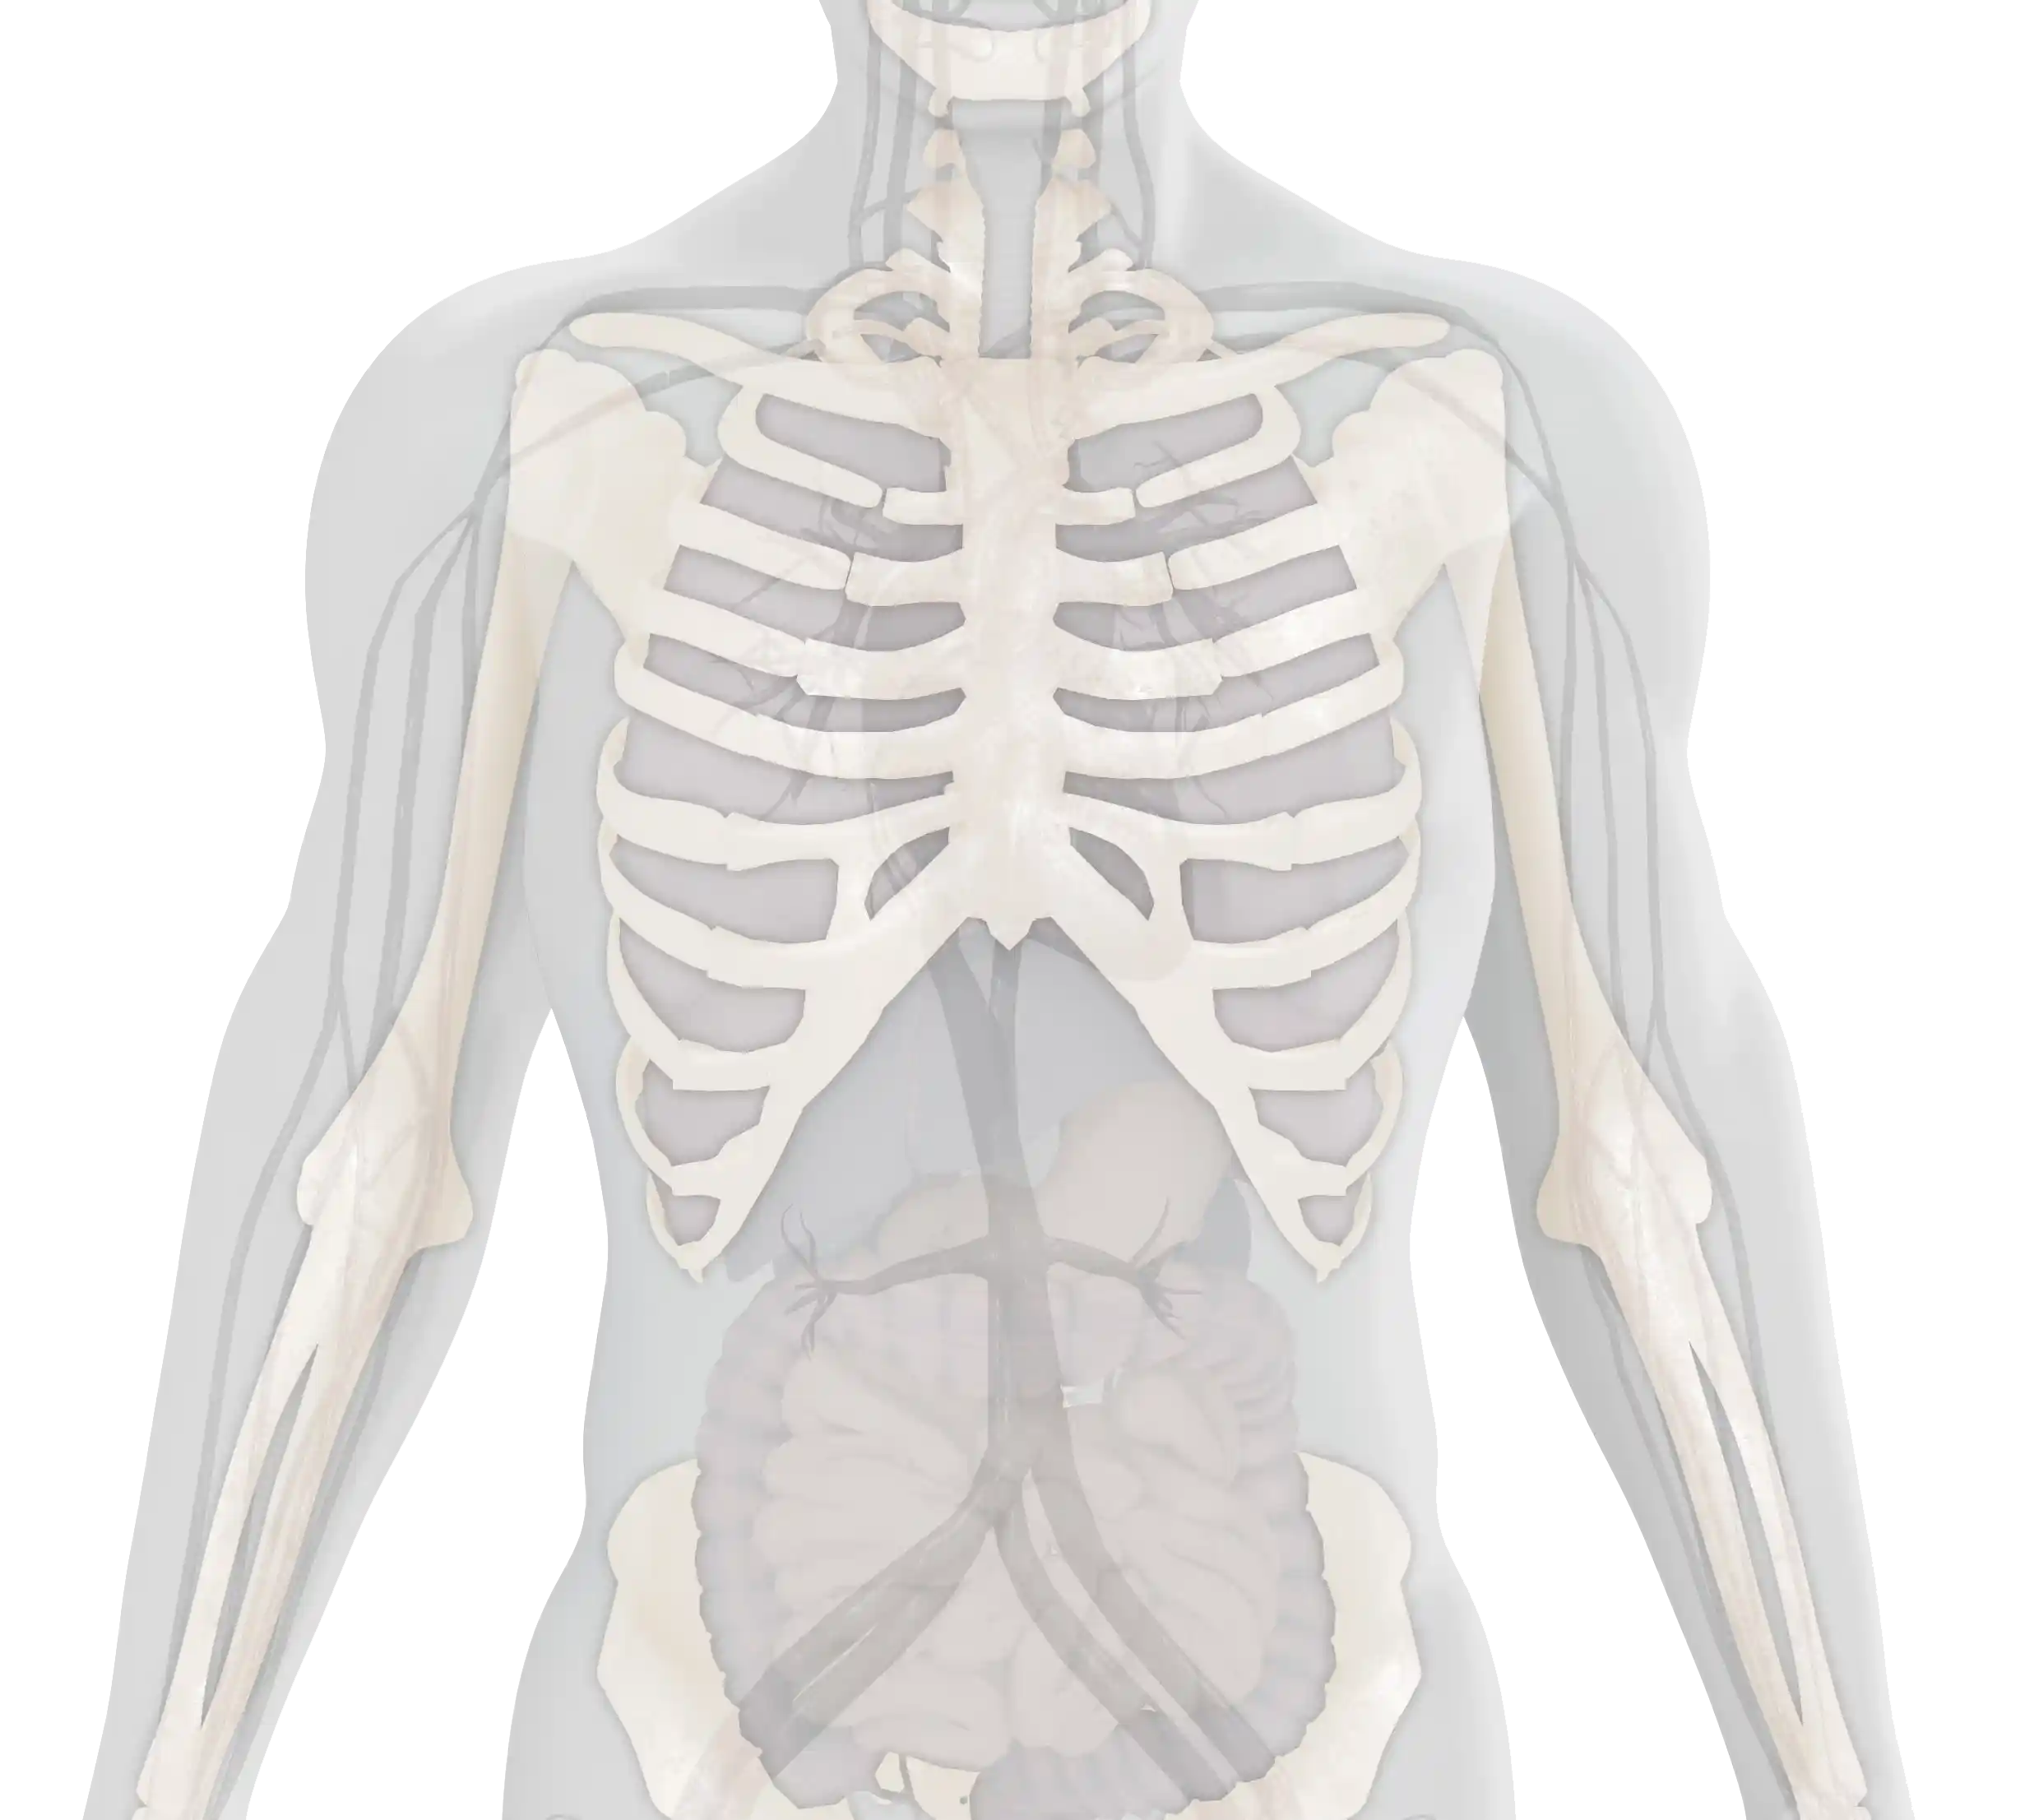 Image showing impacted organs and body parts